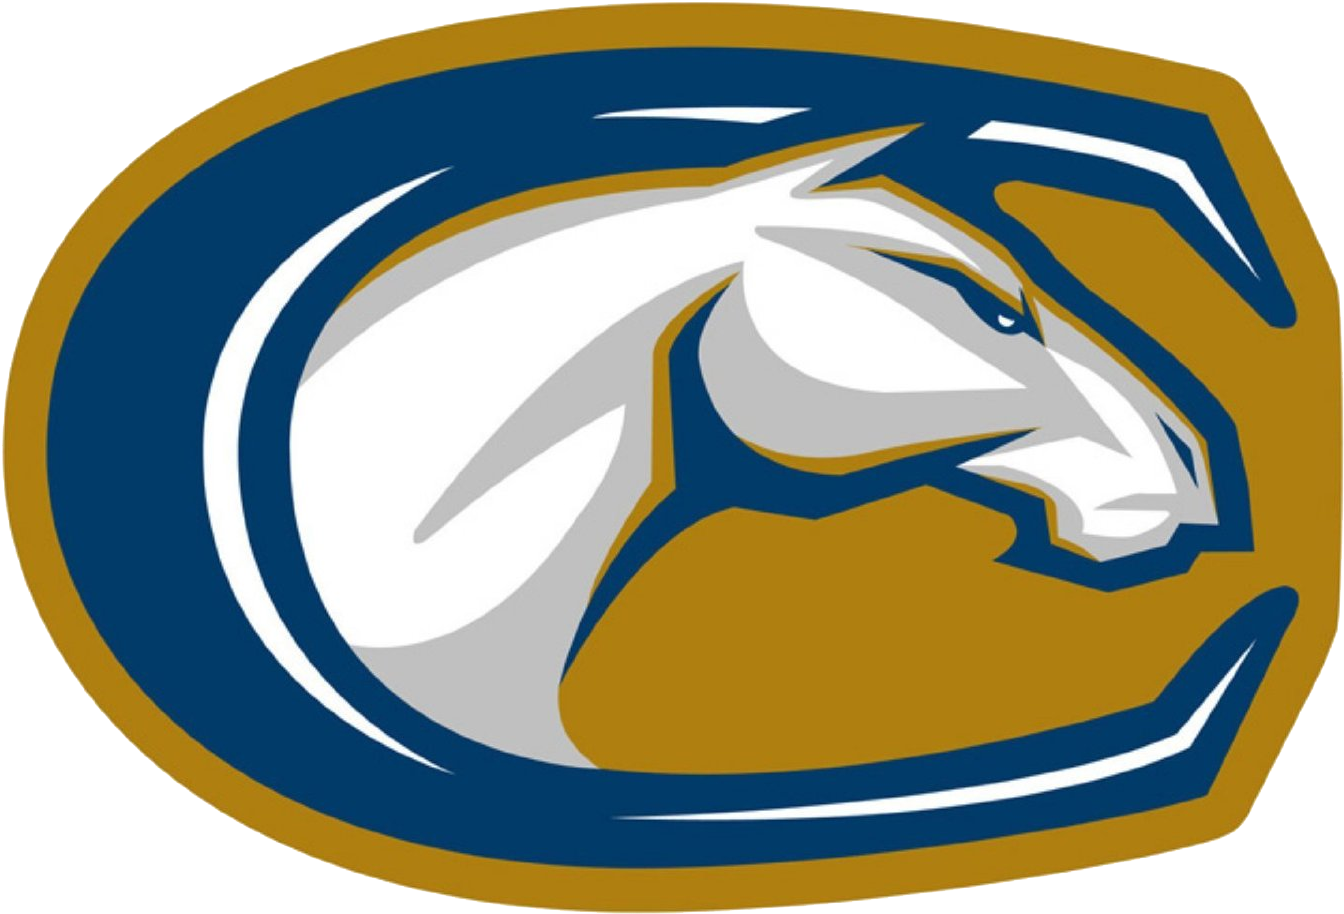 Been Its Job Of Recruiting The 2016 Signing Class - Uc Davis Aggies (1343x1343)